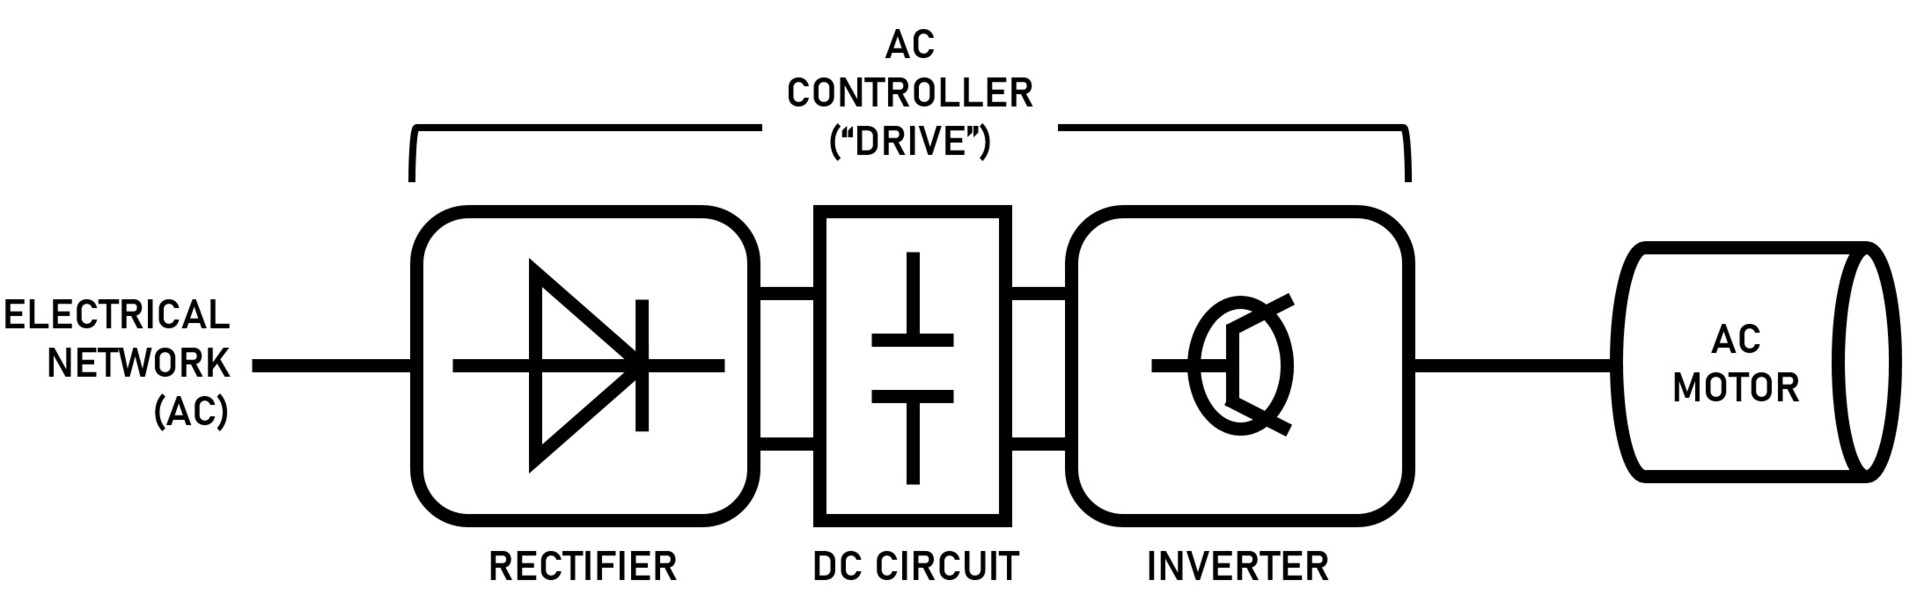 About AC Motor Controllers What They Are and They Work